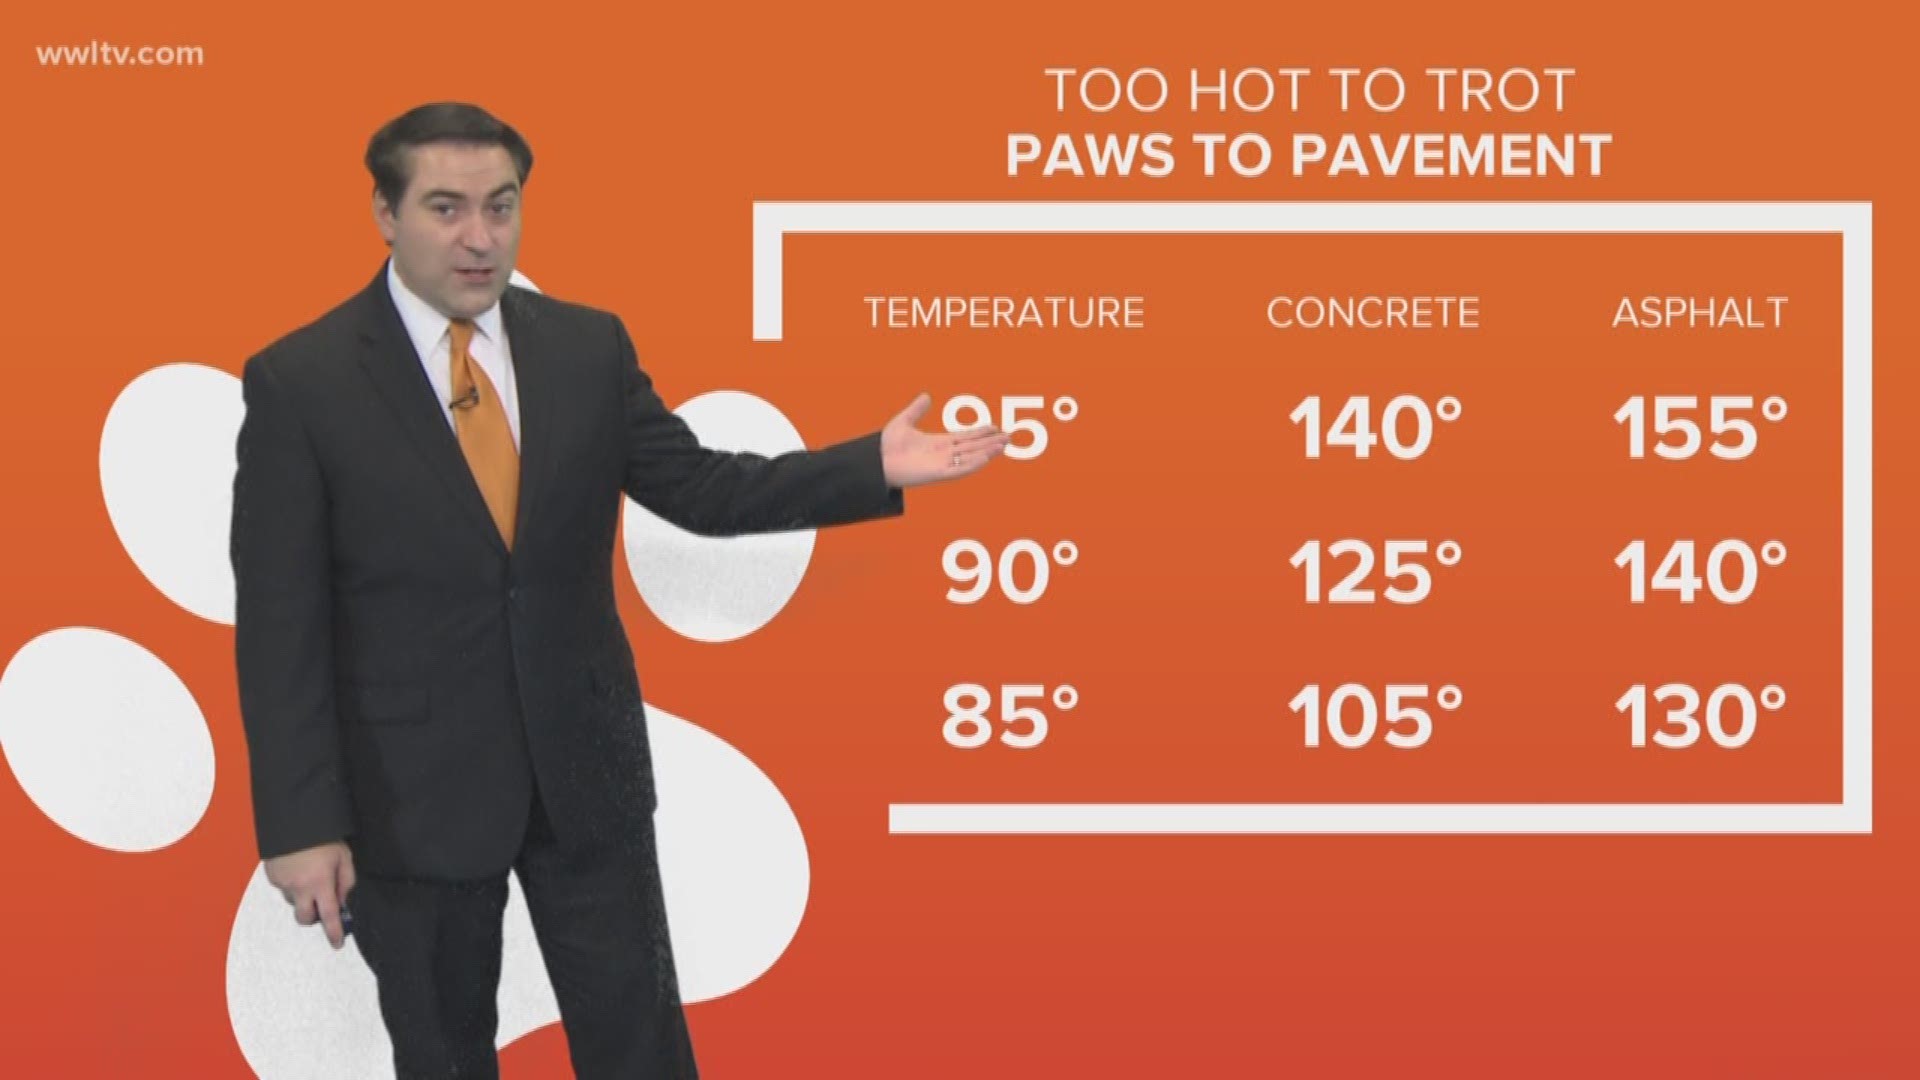 Dave Nussbaum says that if you think the air temperature is hot, the temperature on the concrete and asphalt is much, much worse, especially for your pets. 